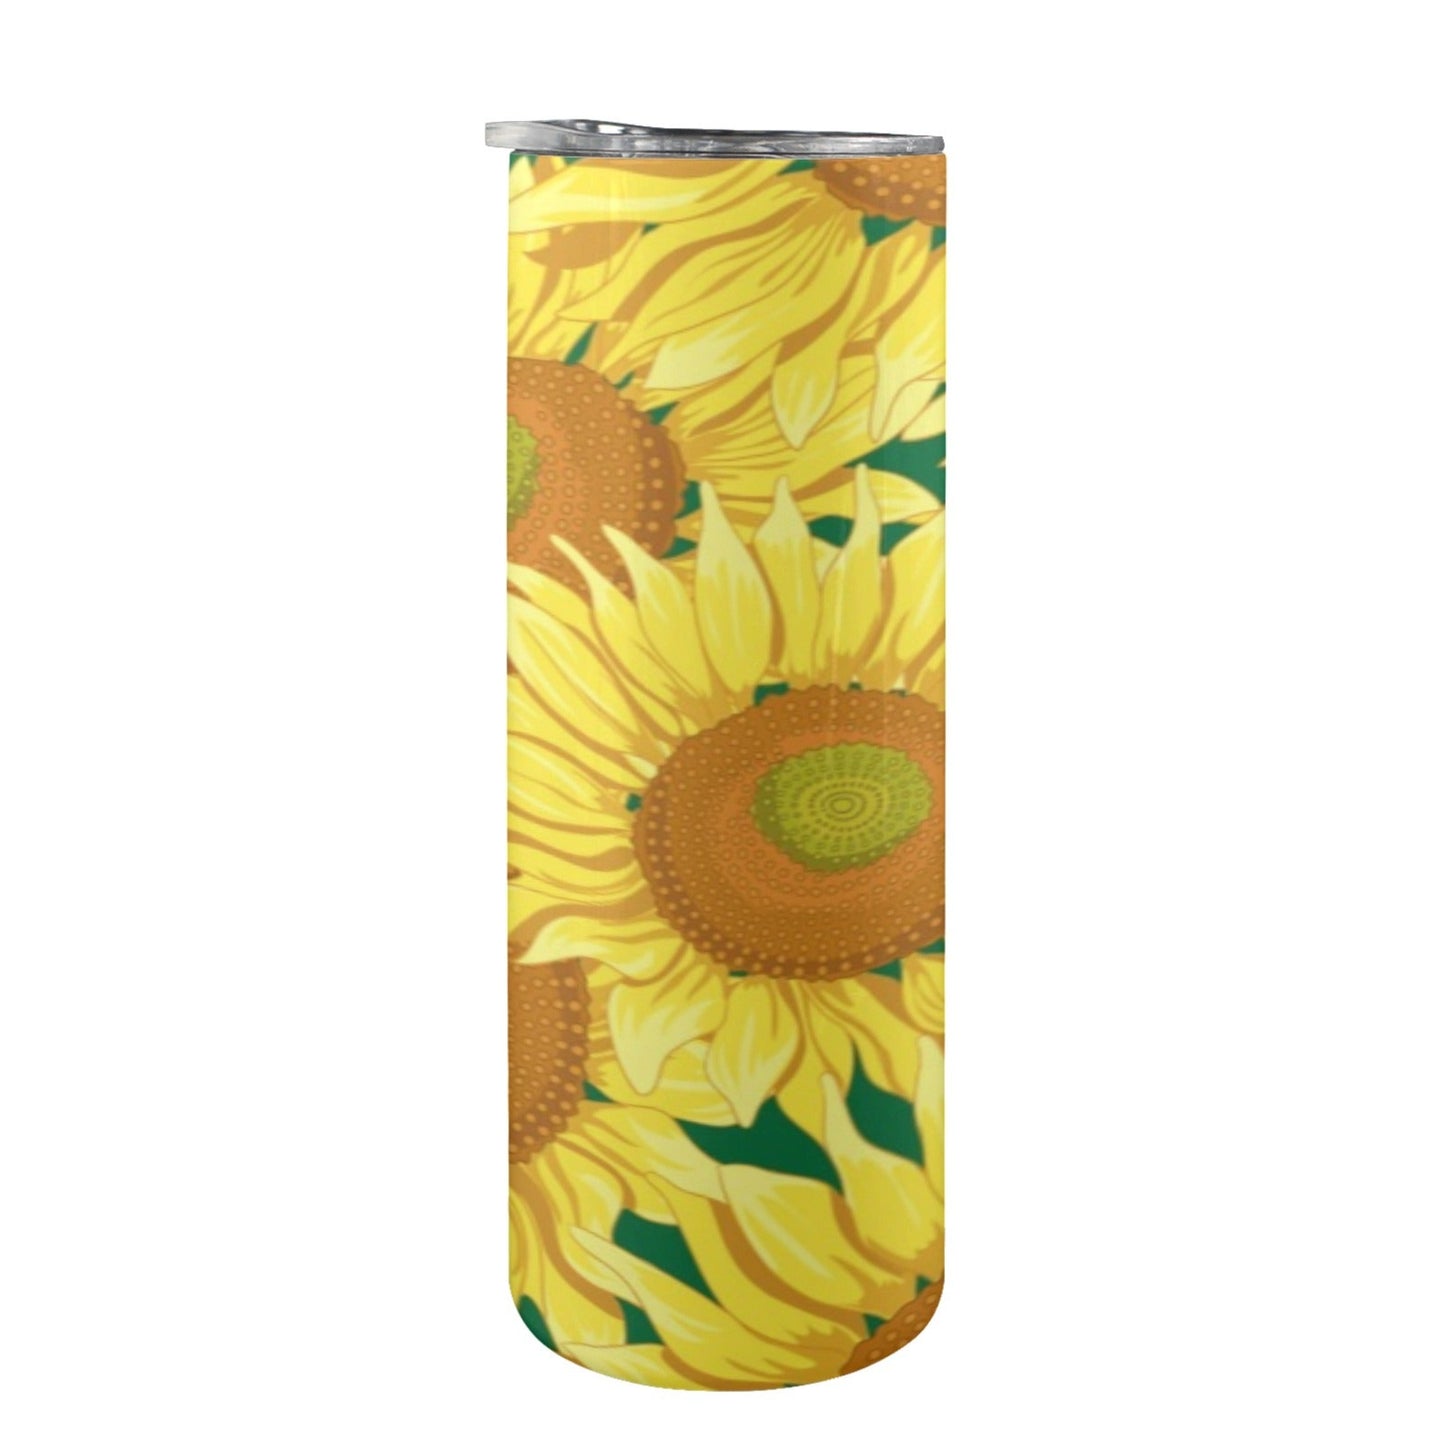 Sunflowers - 20oz Tall Skinny Tumbler with Lid and Straw 20oz Tall Skinny Tumbler with Lid and Straw